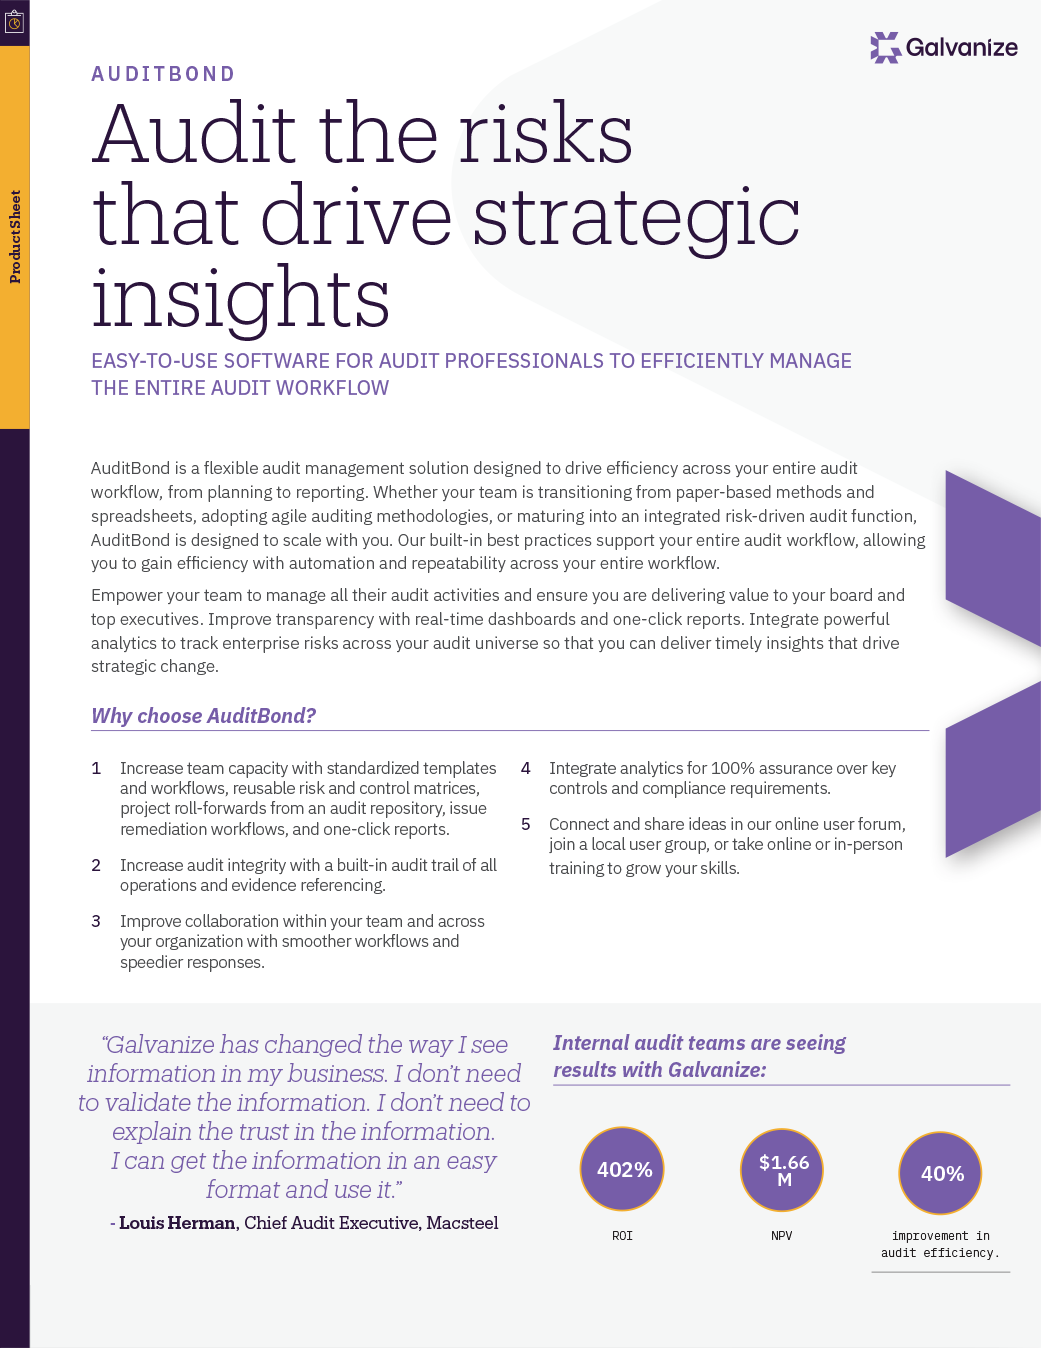 Audit the risks that drive strategic insights